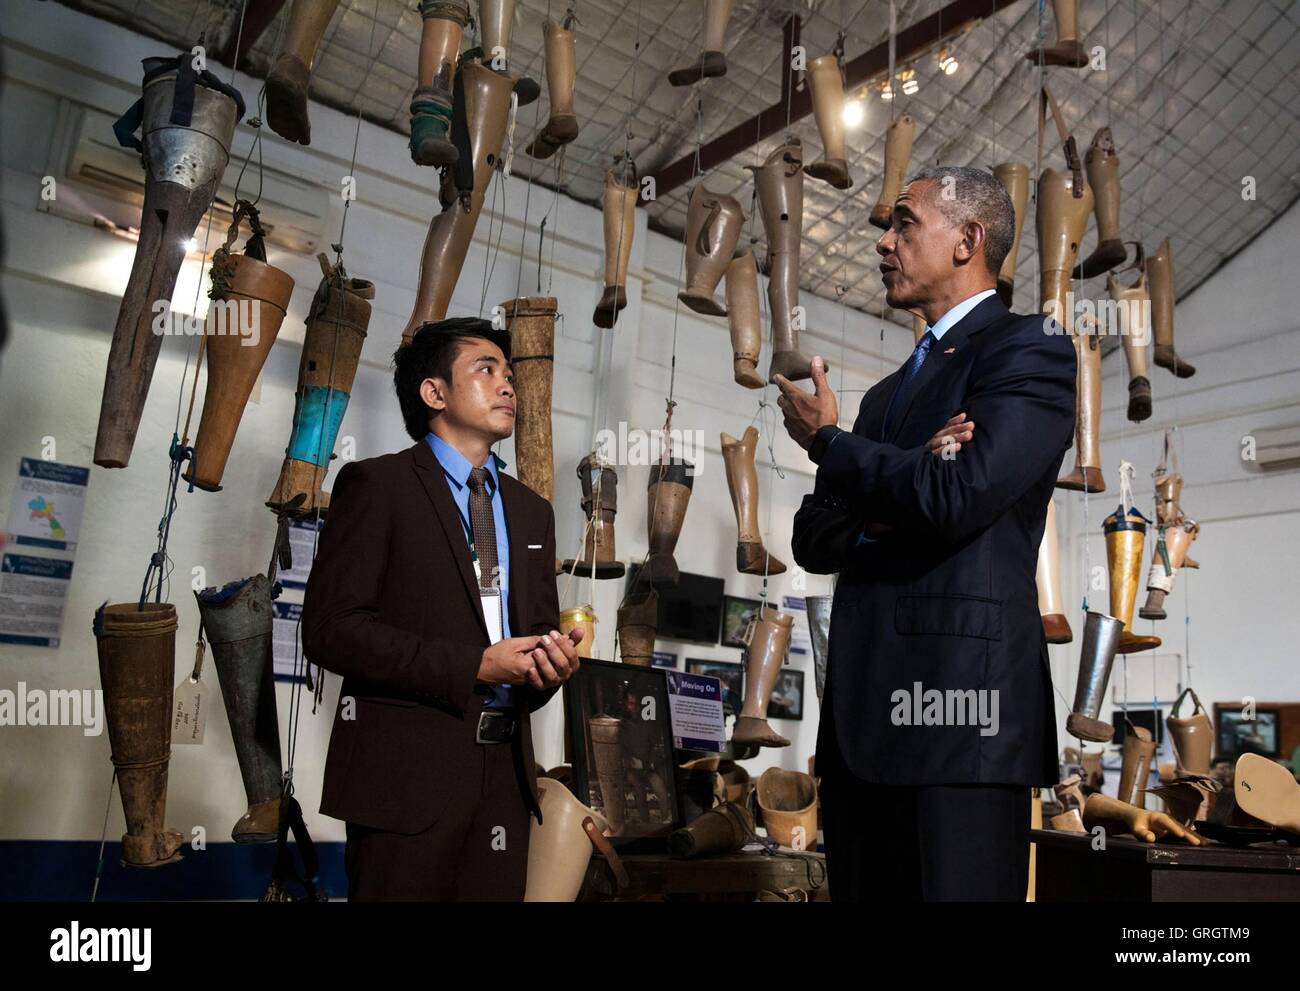 Vientiane, Laos. 6th September, 2016. U.S President Barack Obama meets with unexploded ordnance survivor Thoummy Silamphan from the Quality of Life Association, as he tours the Cooperative Orthotic Prosthetic Enterprise Visitor Centre September 7, 2016 in Vientiane, Laos. Obama is in Laos for the ASEAN Summit. Credit:  Planetpix/Alamy Live News Stock Photo